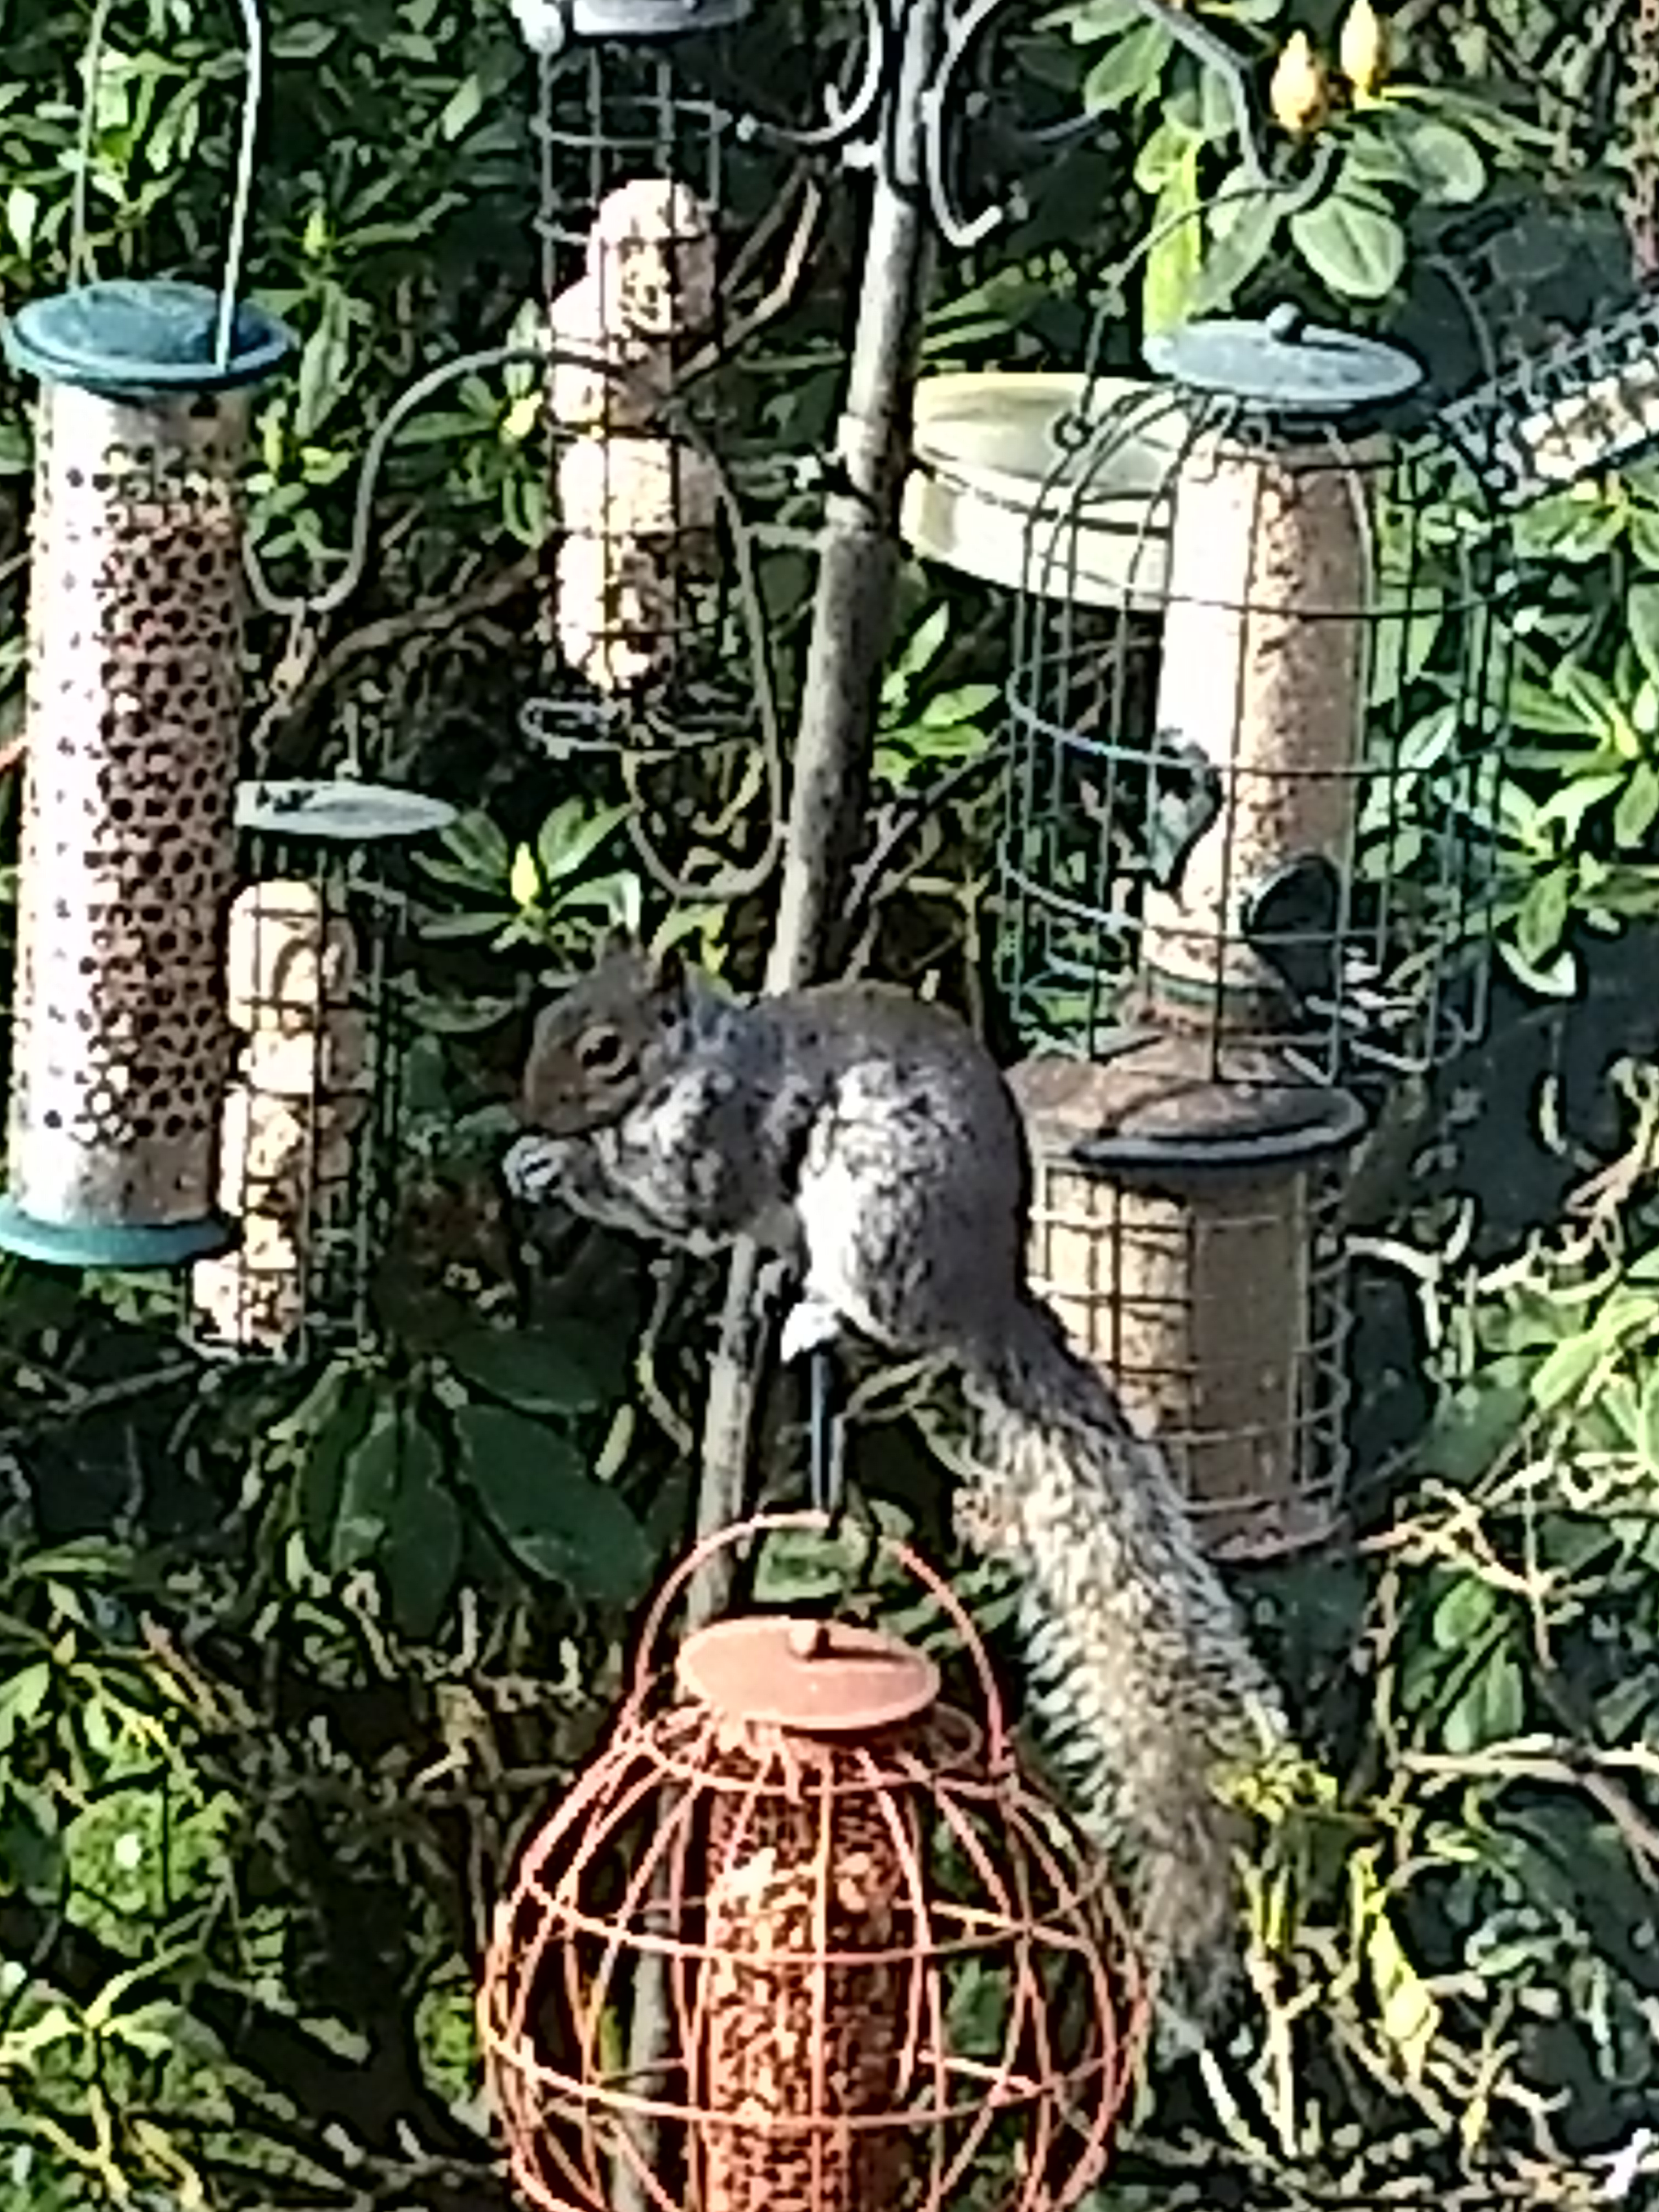 Squirel trying to get a bird seed